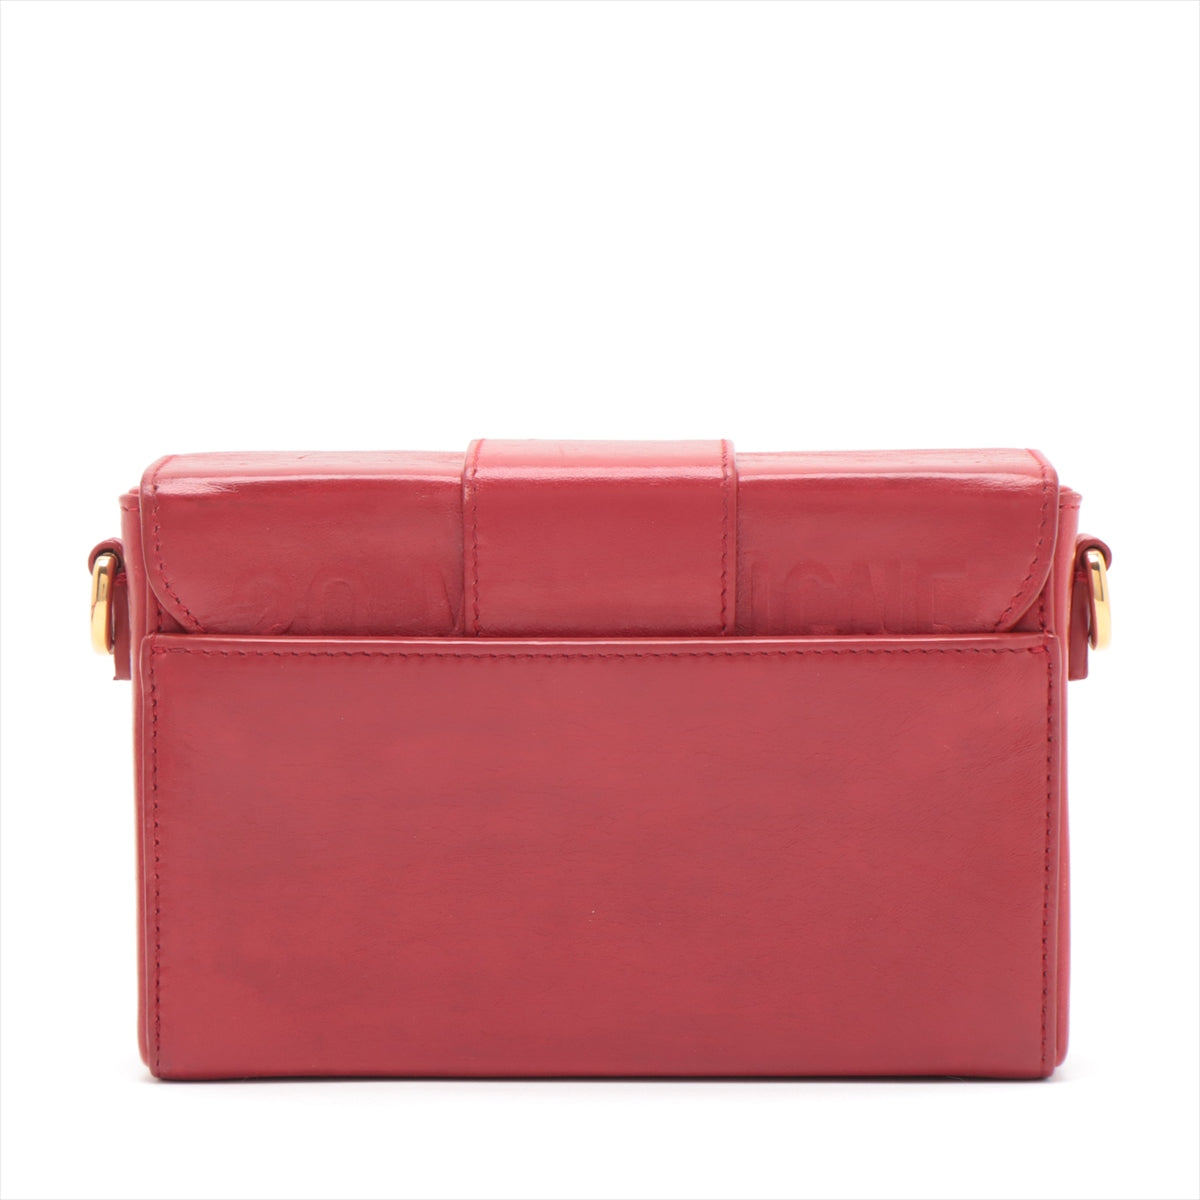 Christian Dior Montaigne 30 Leather Shoulder bag Red